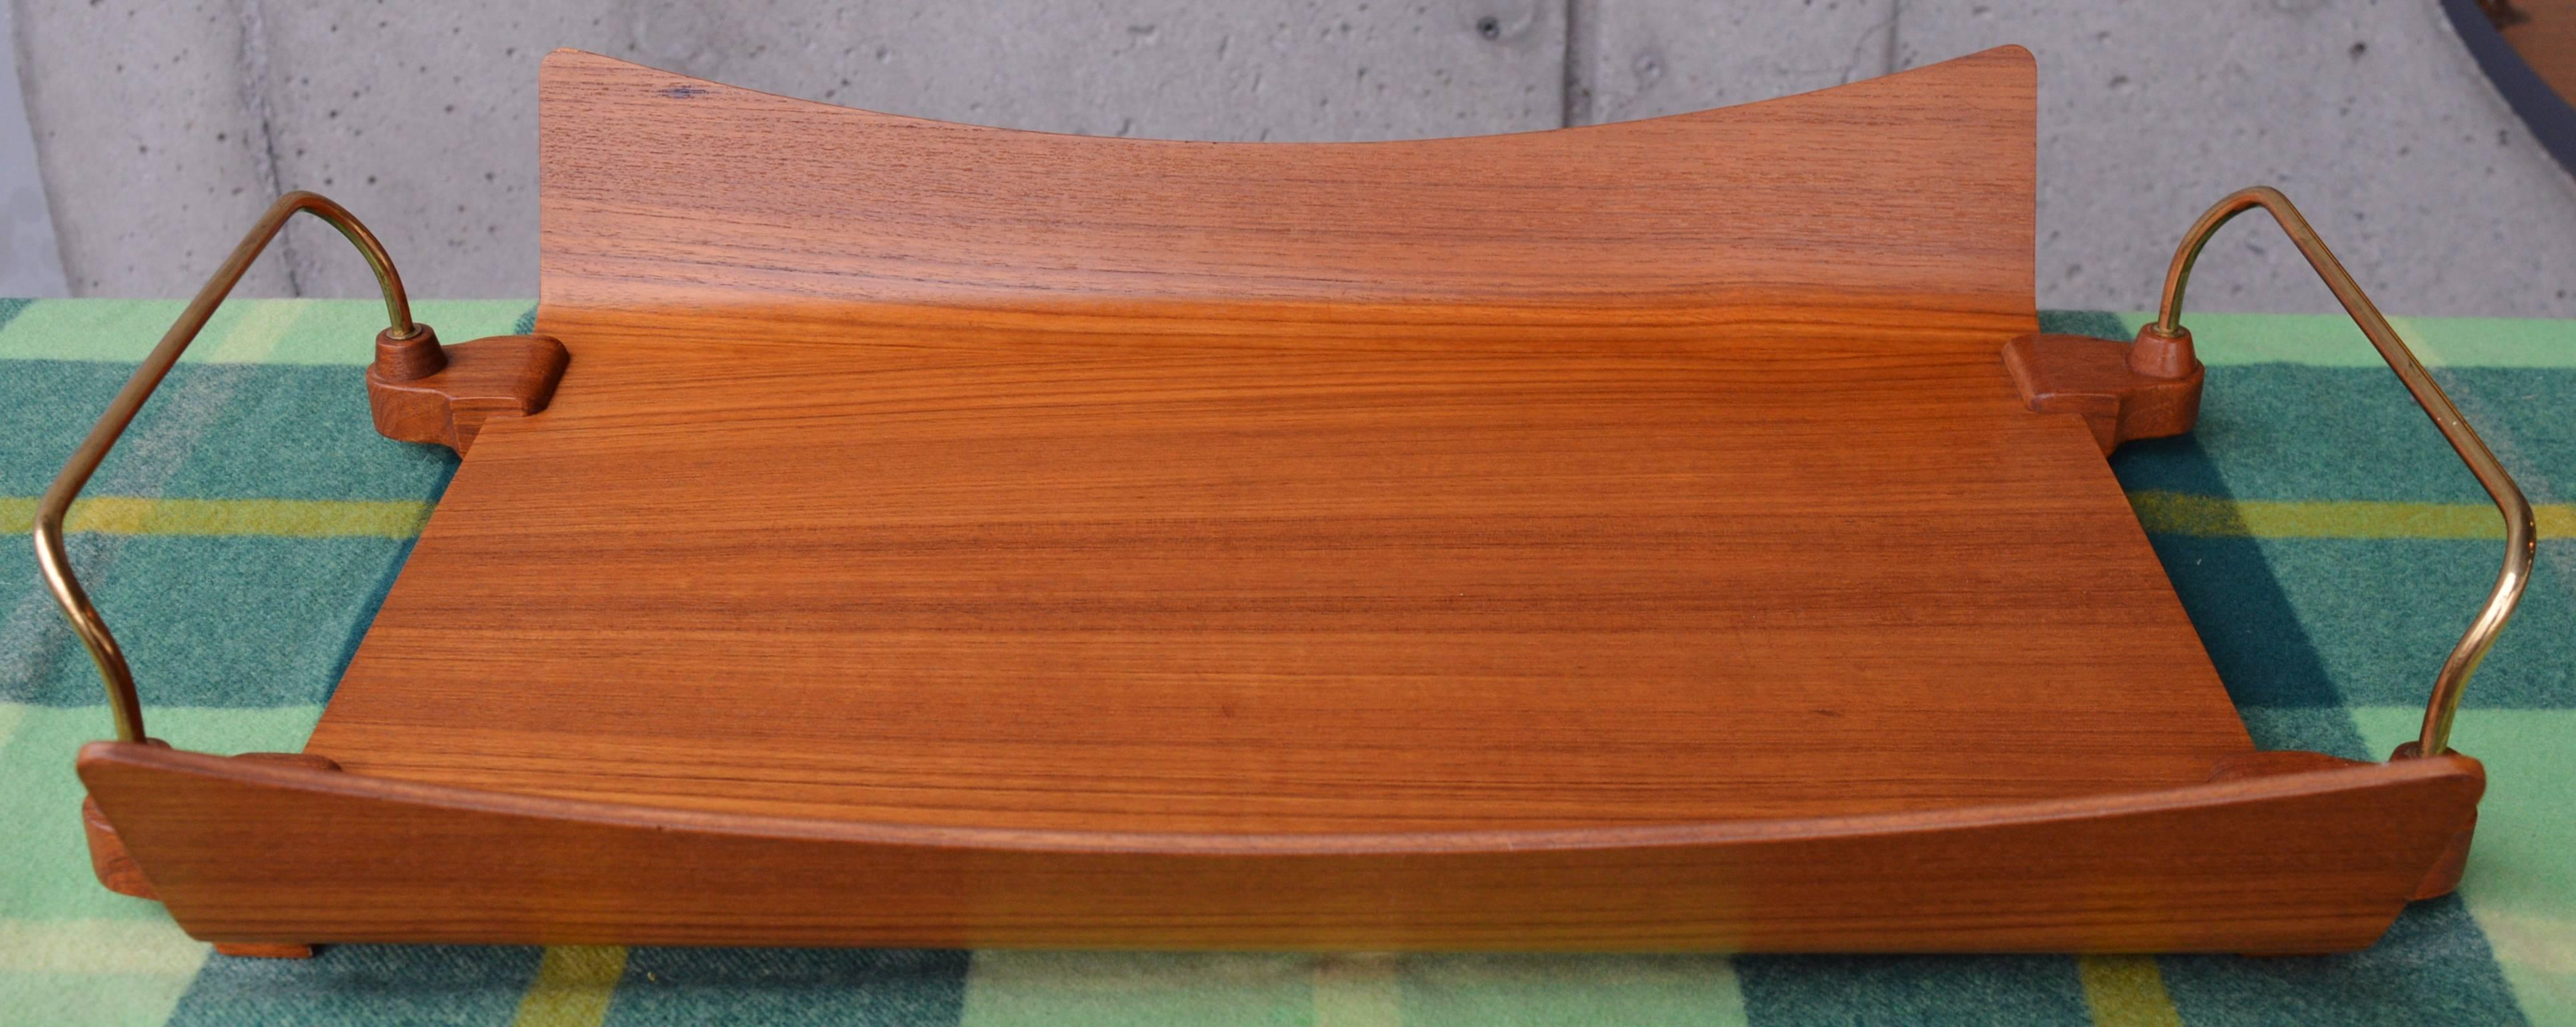 This unusual, large Danish modern teak tray is a beauty in amazing condition. Despite its unique style, we were unable to identify the designer, although by experience, the quality construction is undoubtedly Scandinavian. Featuring flared and arced